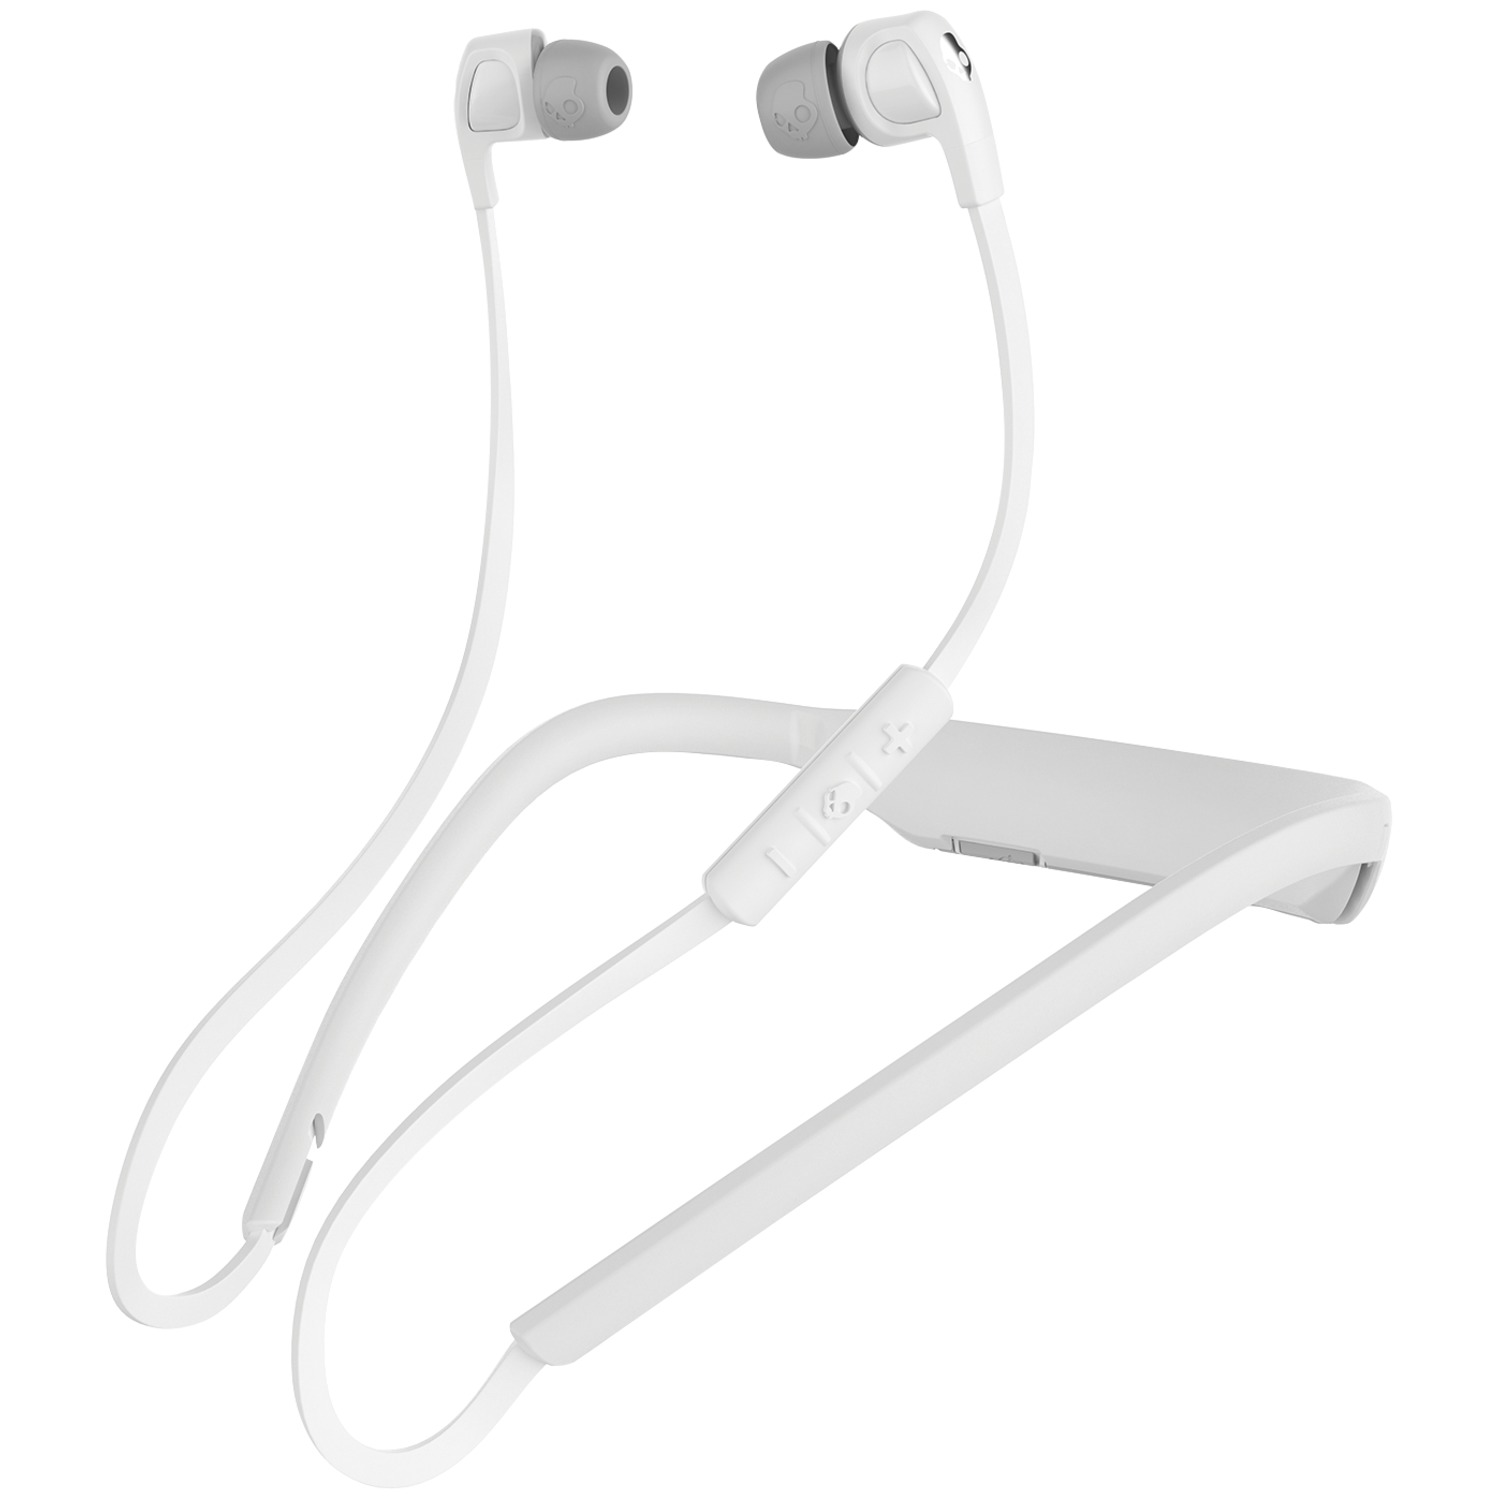 Skullcandy S2PGHW-177 In-Ear Smokin' Buds 2 Bluetooth Wireless Headphones with Microphone (White/Chrome) - image 1 of 3